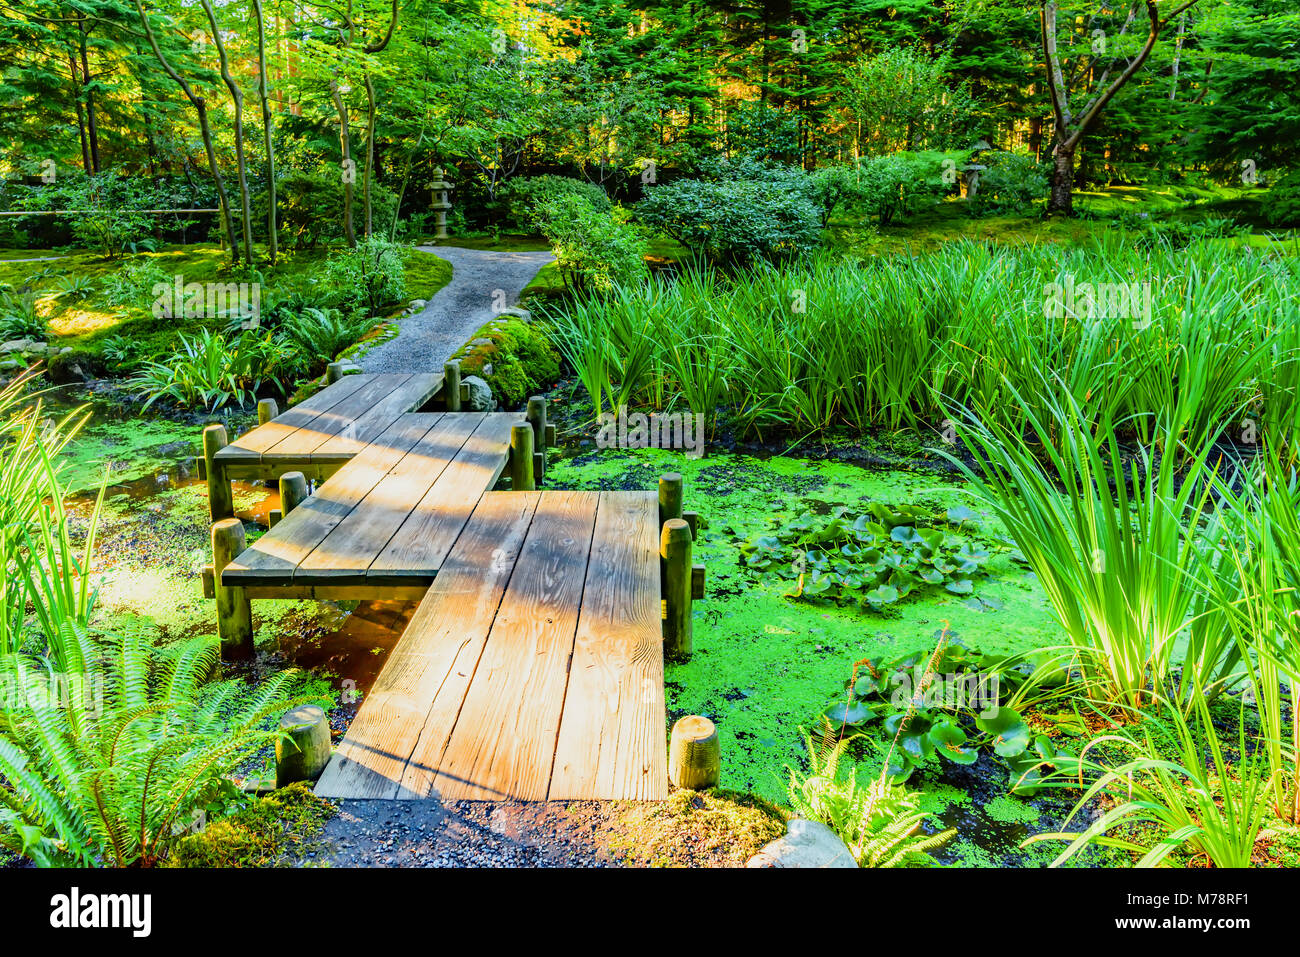 a wooden bridge across a pond with duckweed and leaves of water lilies, in a park with subtropical plants, a fern, green trees and shrubs Stock Photo